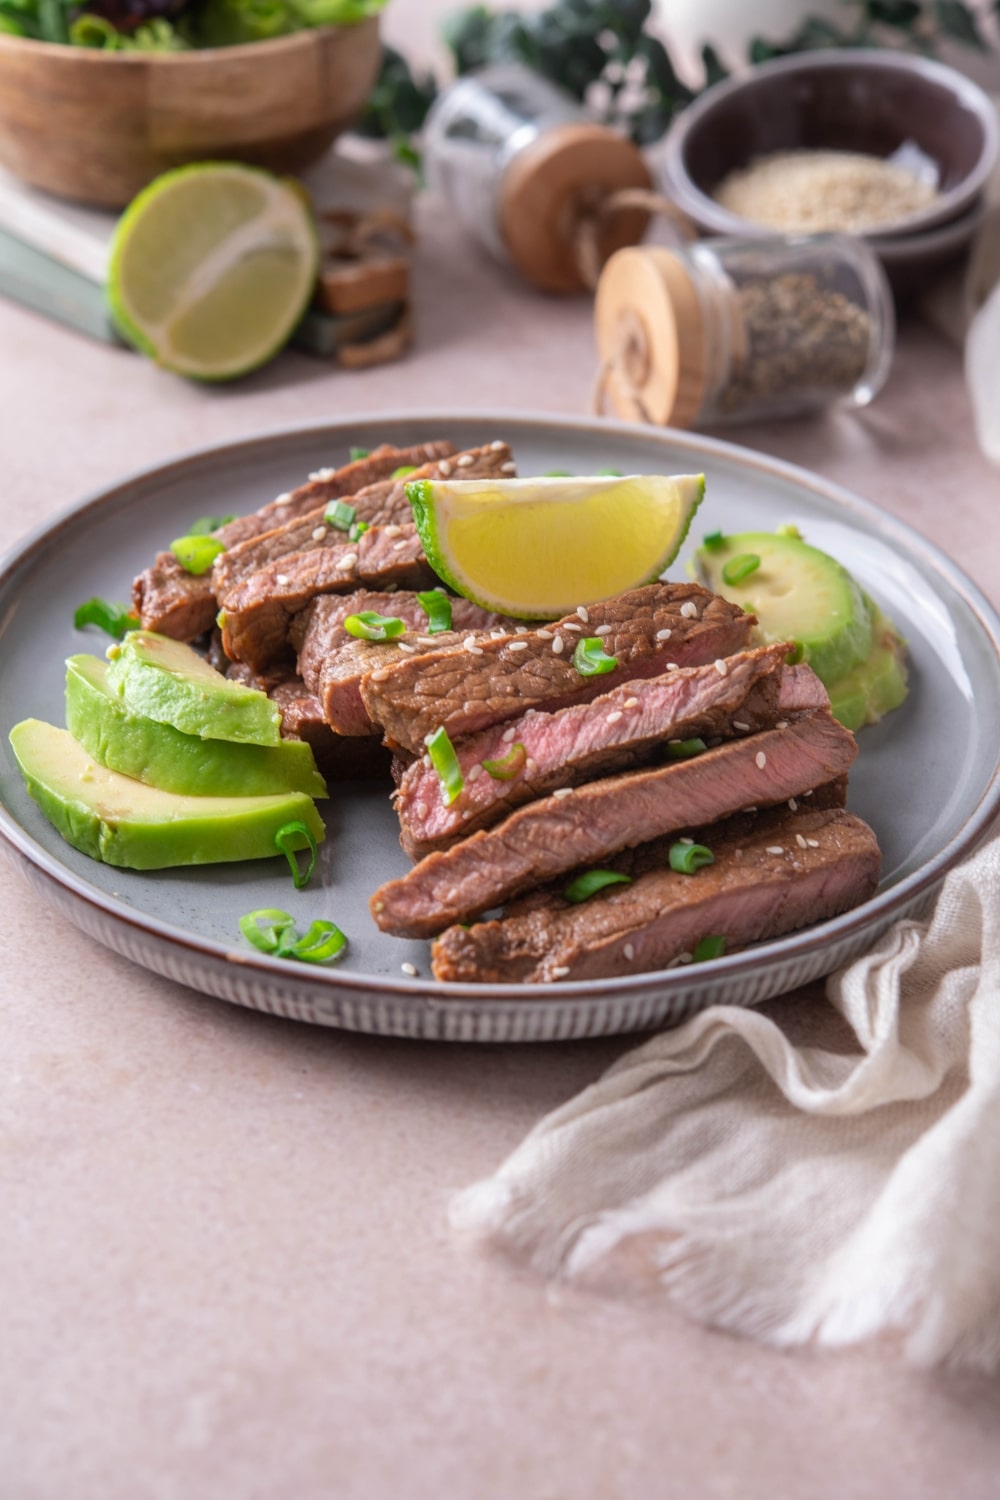 Sliced sirloin tip steak on a plate garnished with avocado slices, lime wedges, chopped green onions, and sesame seeds.